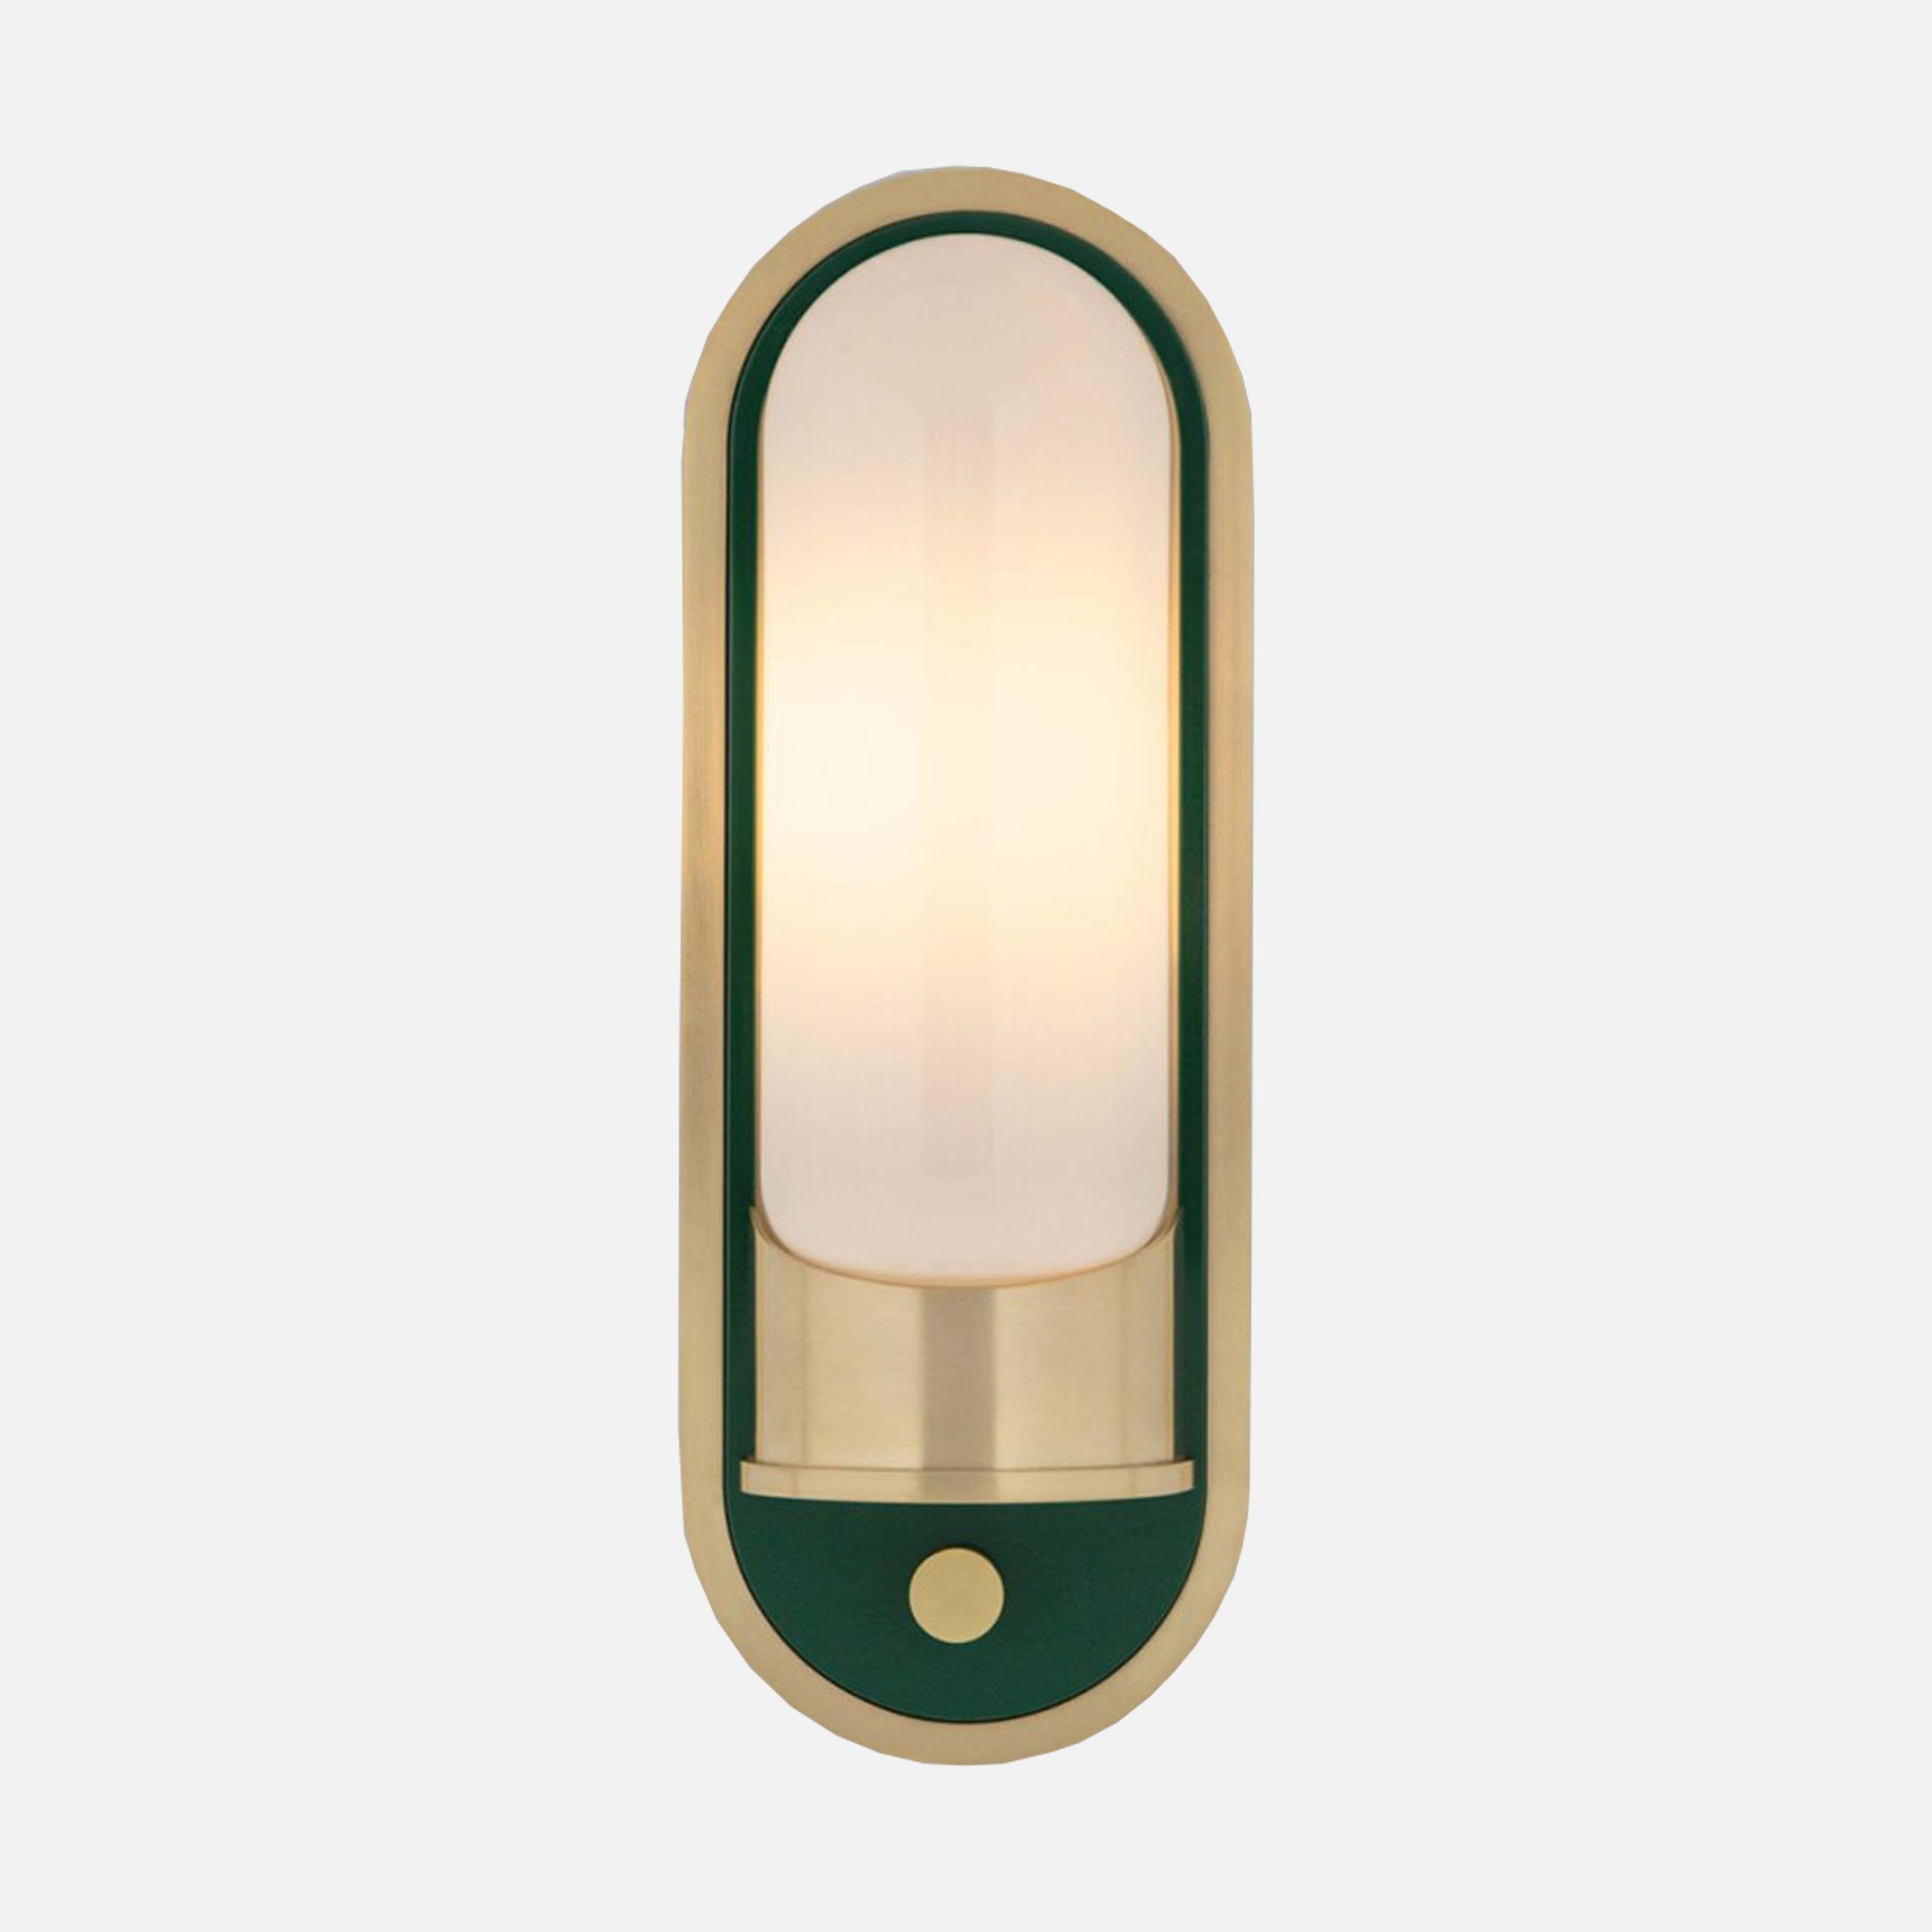 The image of an Urban Electric Bubble Sconce product